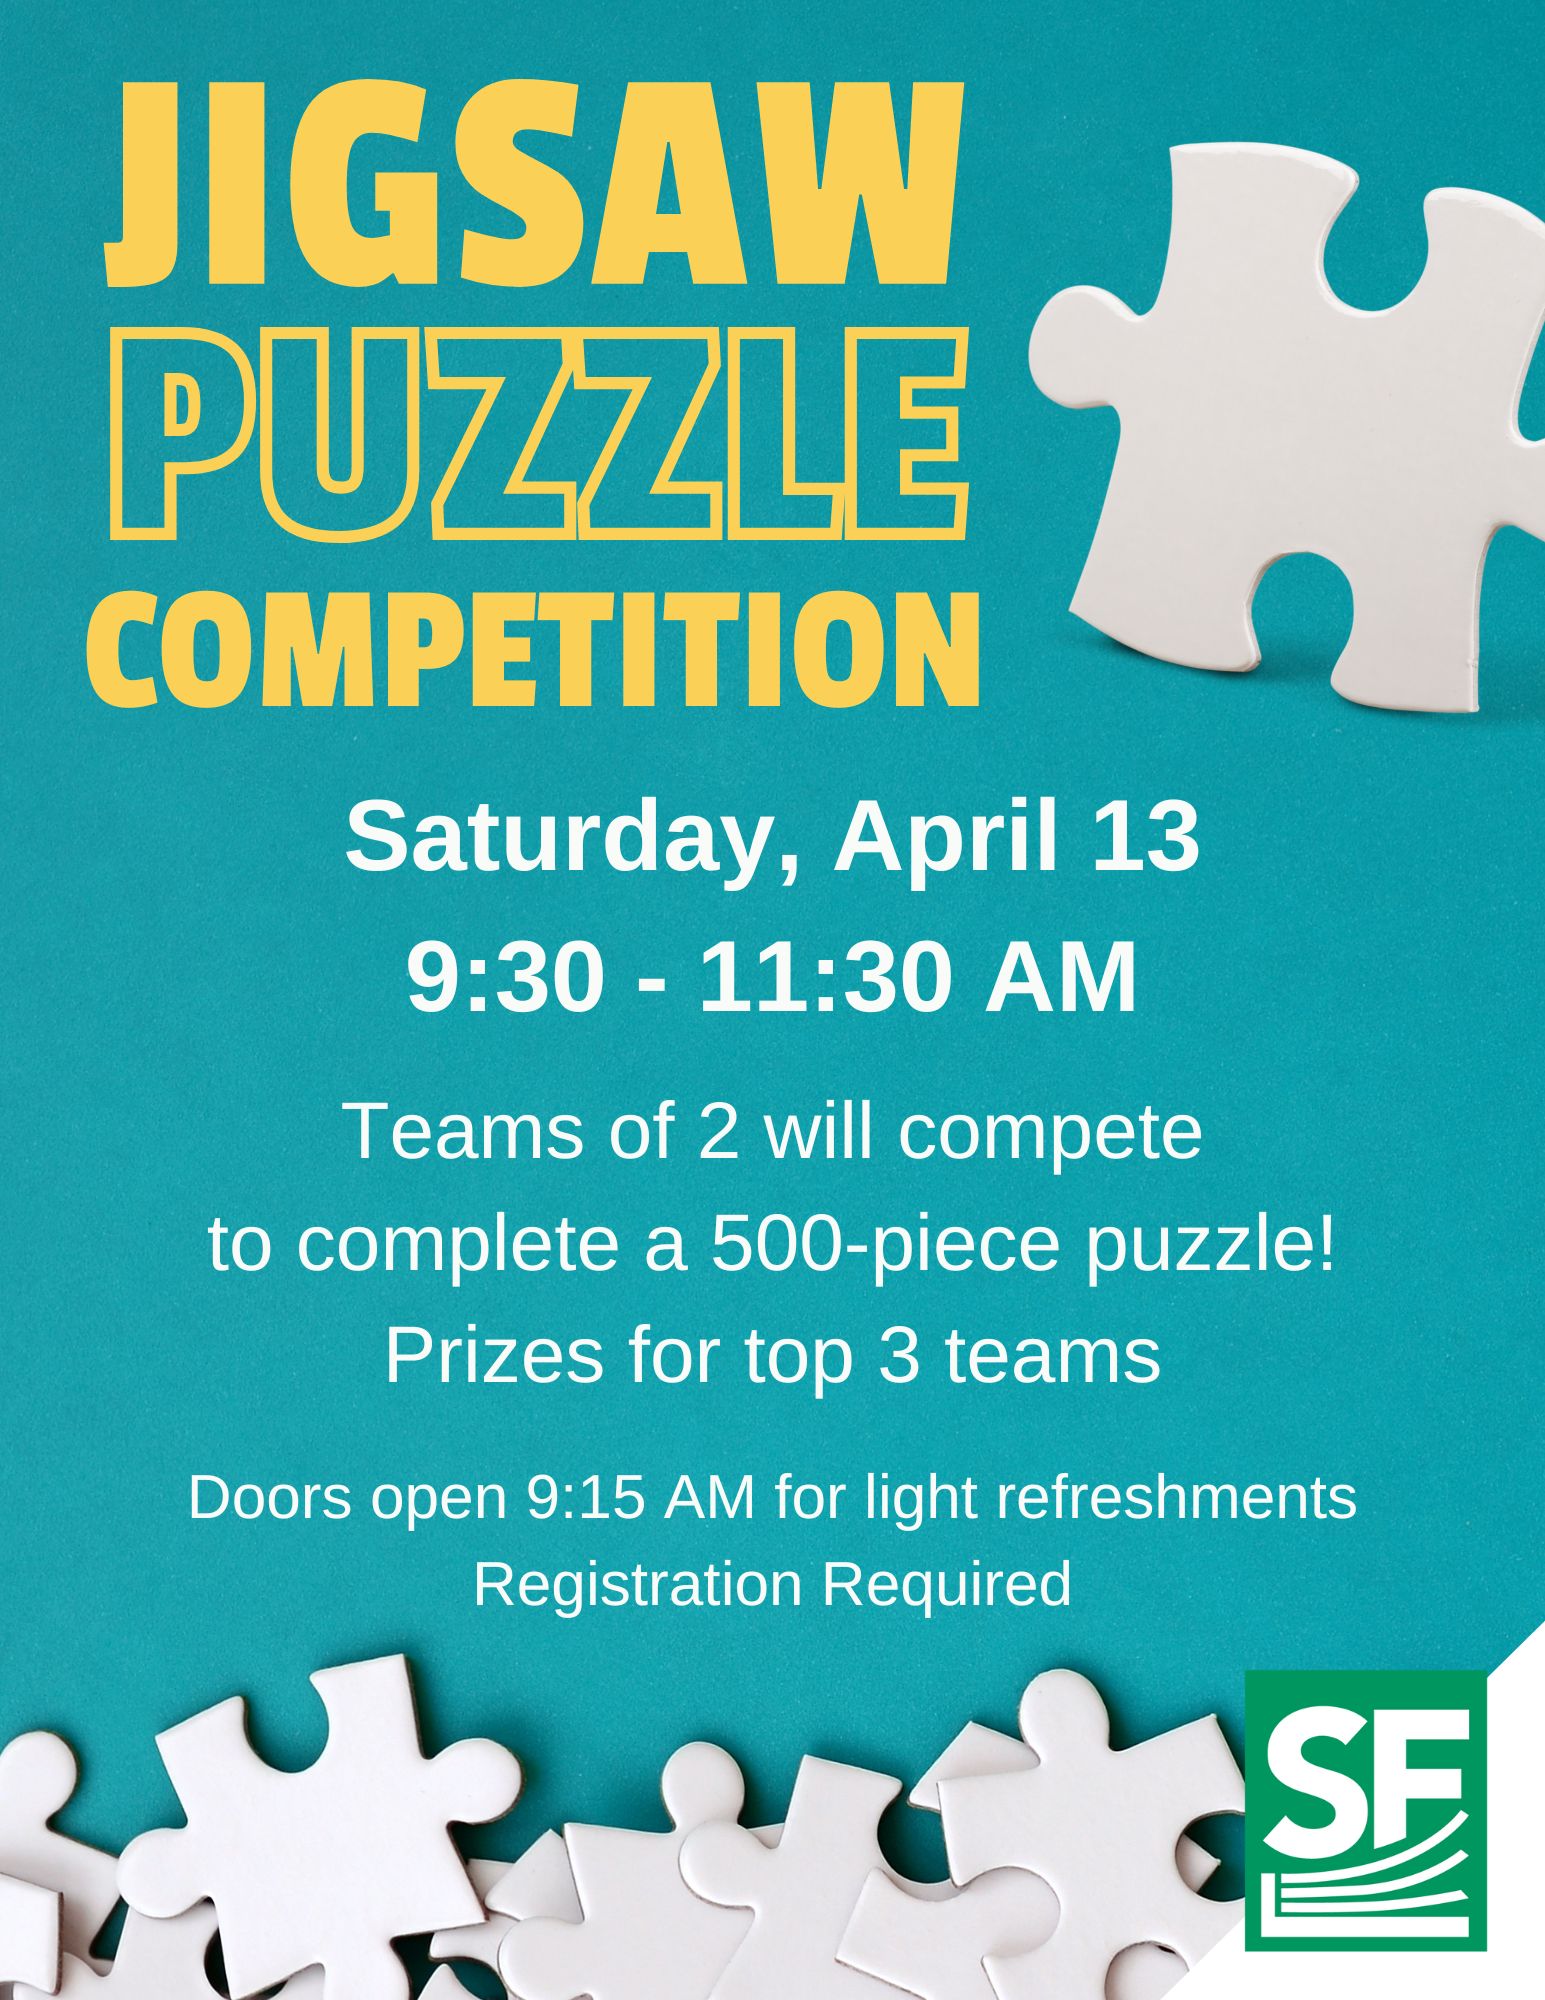 Jigsaw Puzzle Competition - Flyer